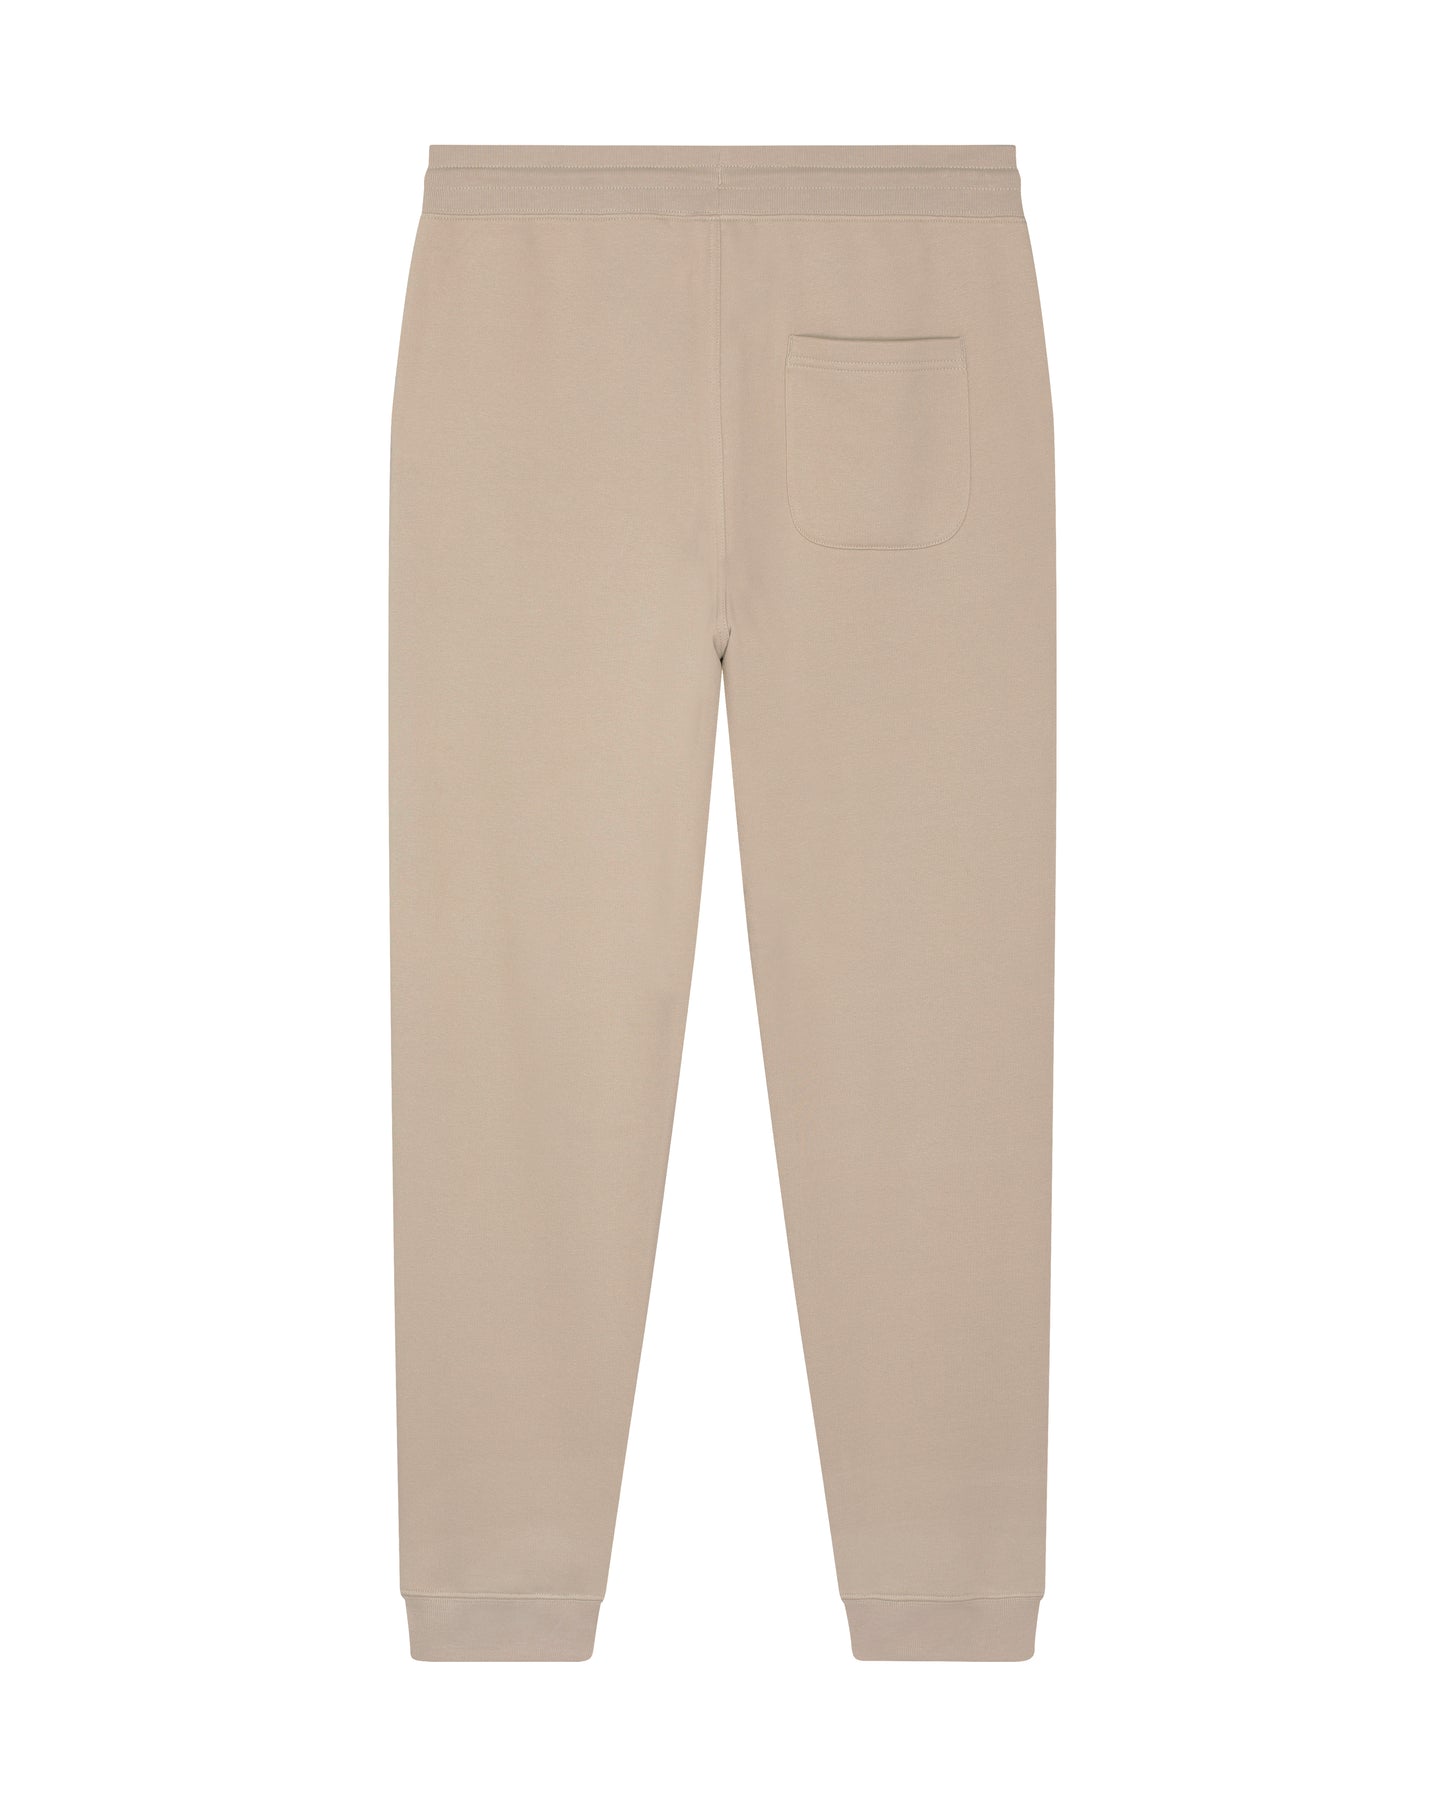 PIERRE BERGER - Men's jogging pants 100% recycled embroidery